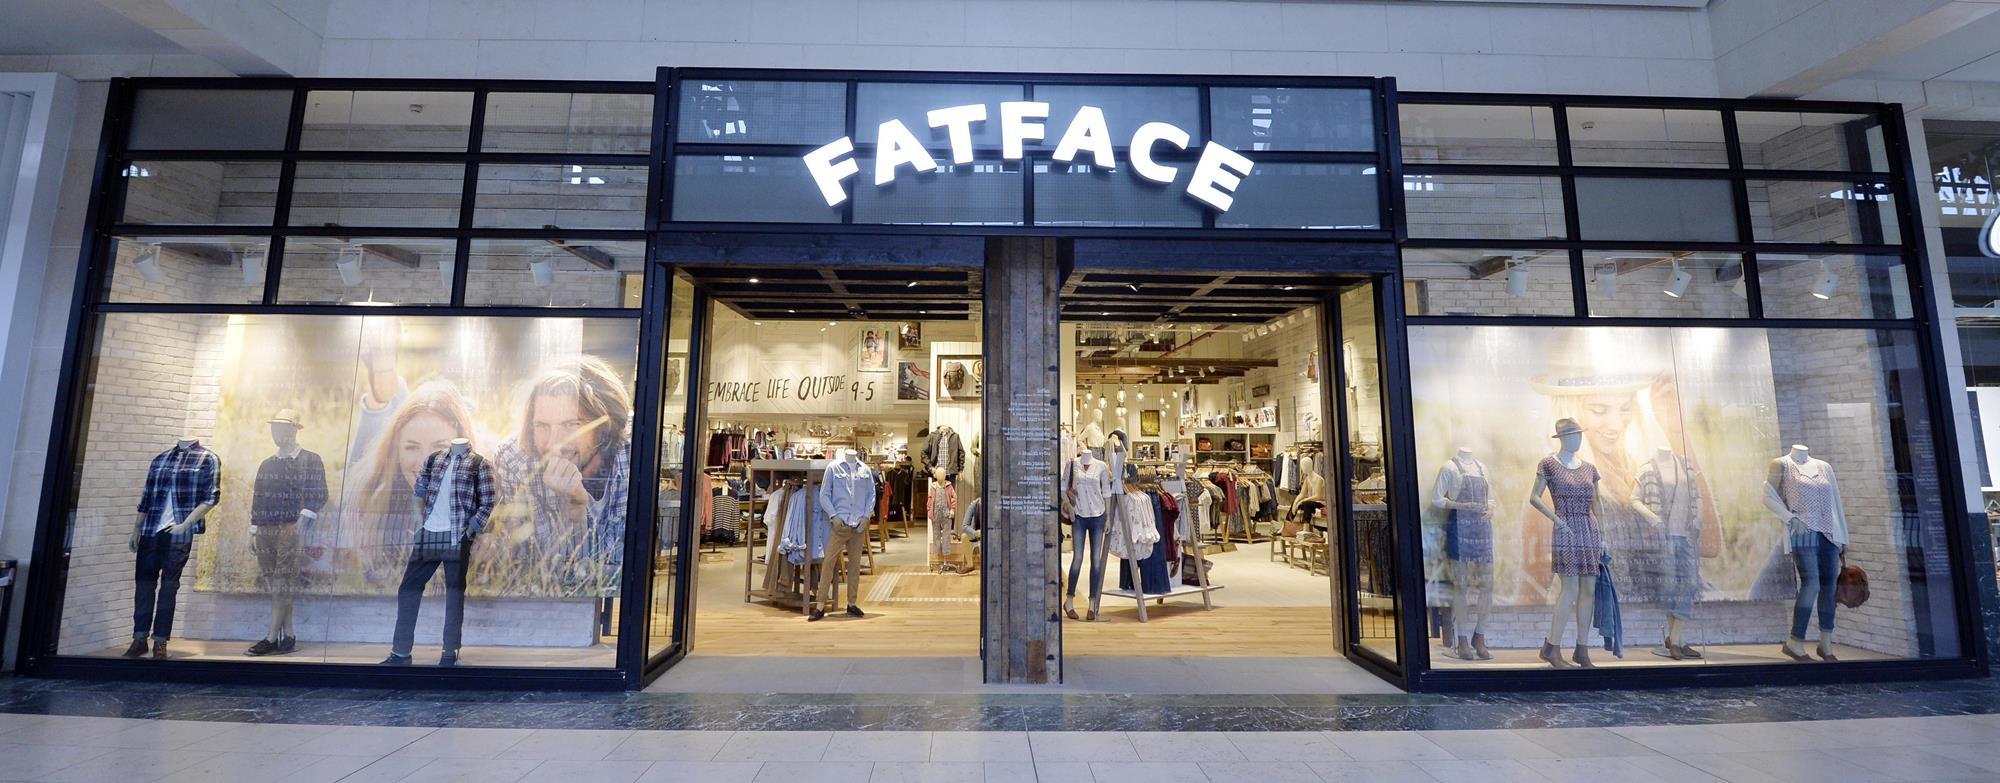 3059648_bluewater_new_fatface_store_089